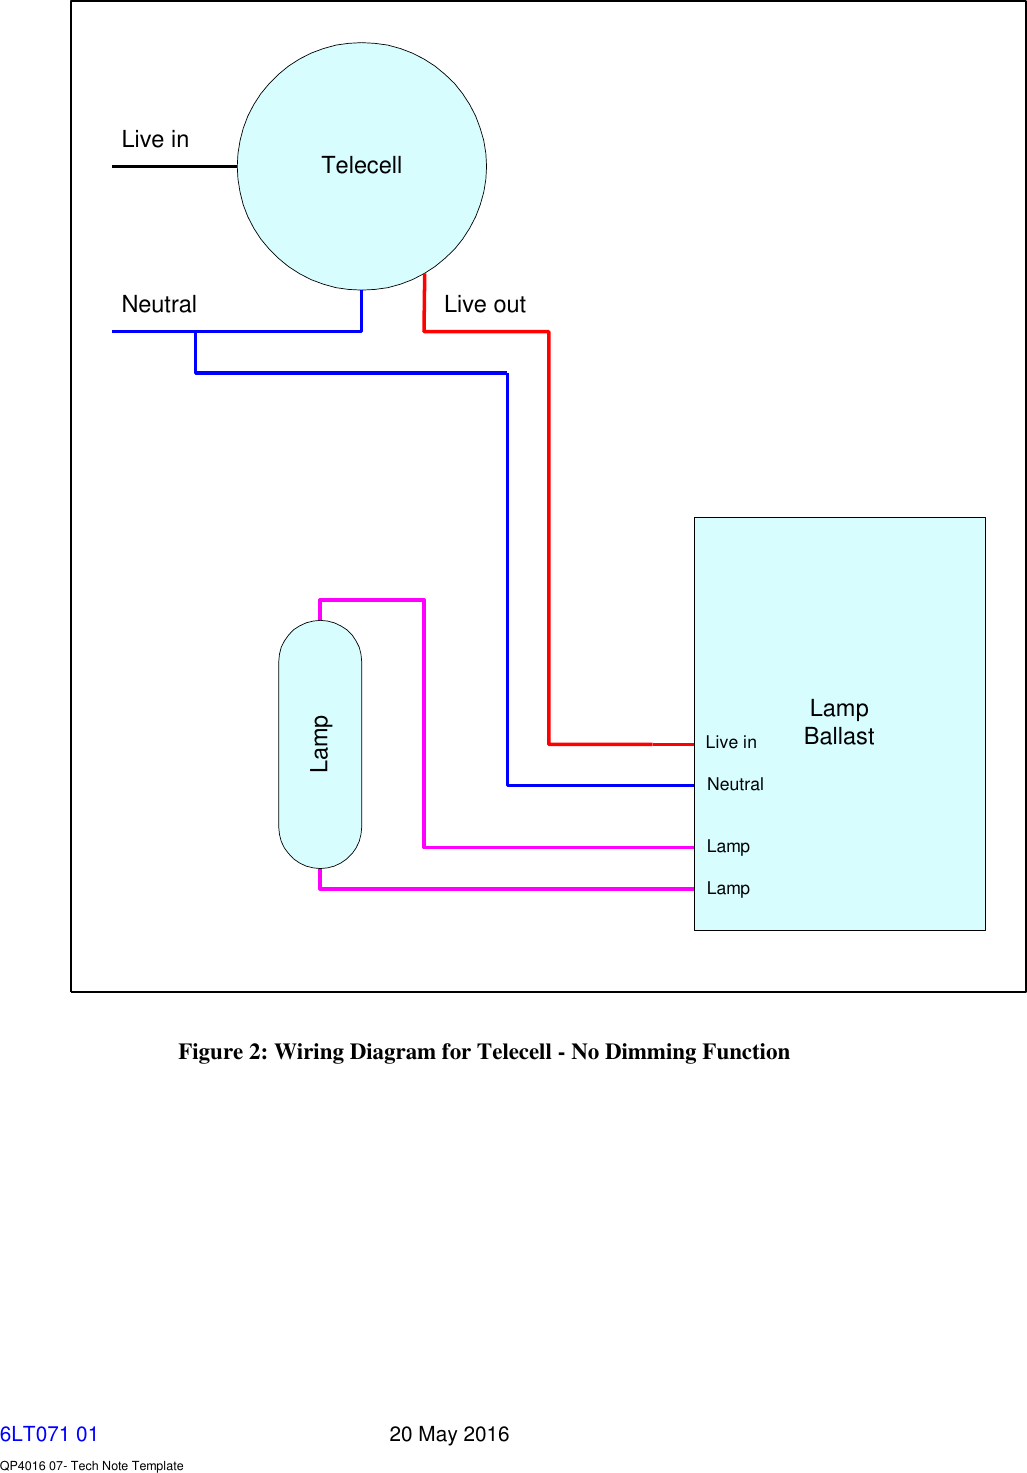   6LT071 01       20 May 2016    QP4016 07- Tech Note Template TelecellLampBallastLampLive inNeutral Live outLampLampNeutralLive in Figure 2: Wiring Diagram for Telecell - No Dimming Function   